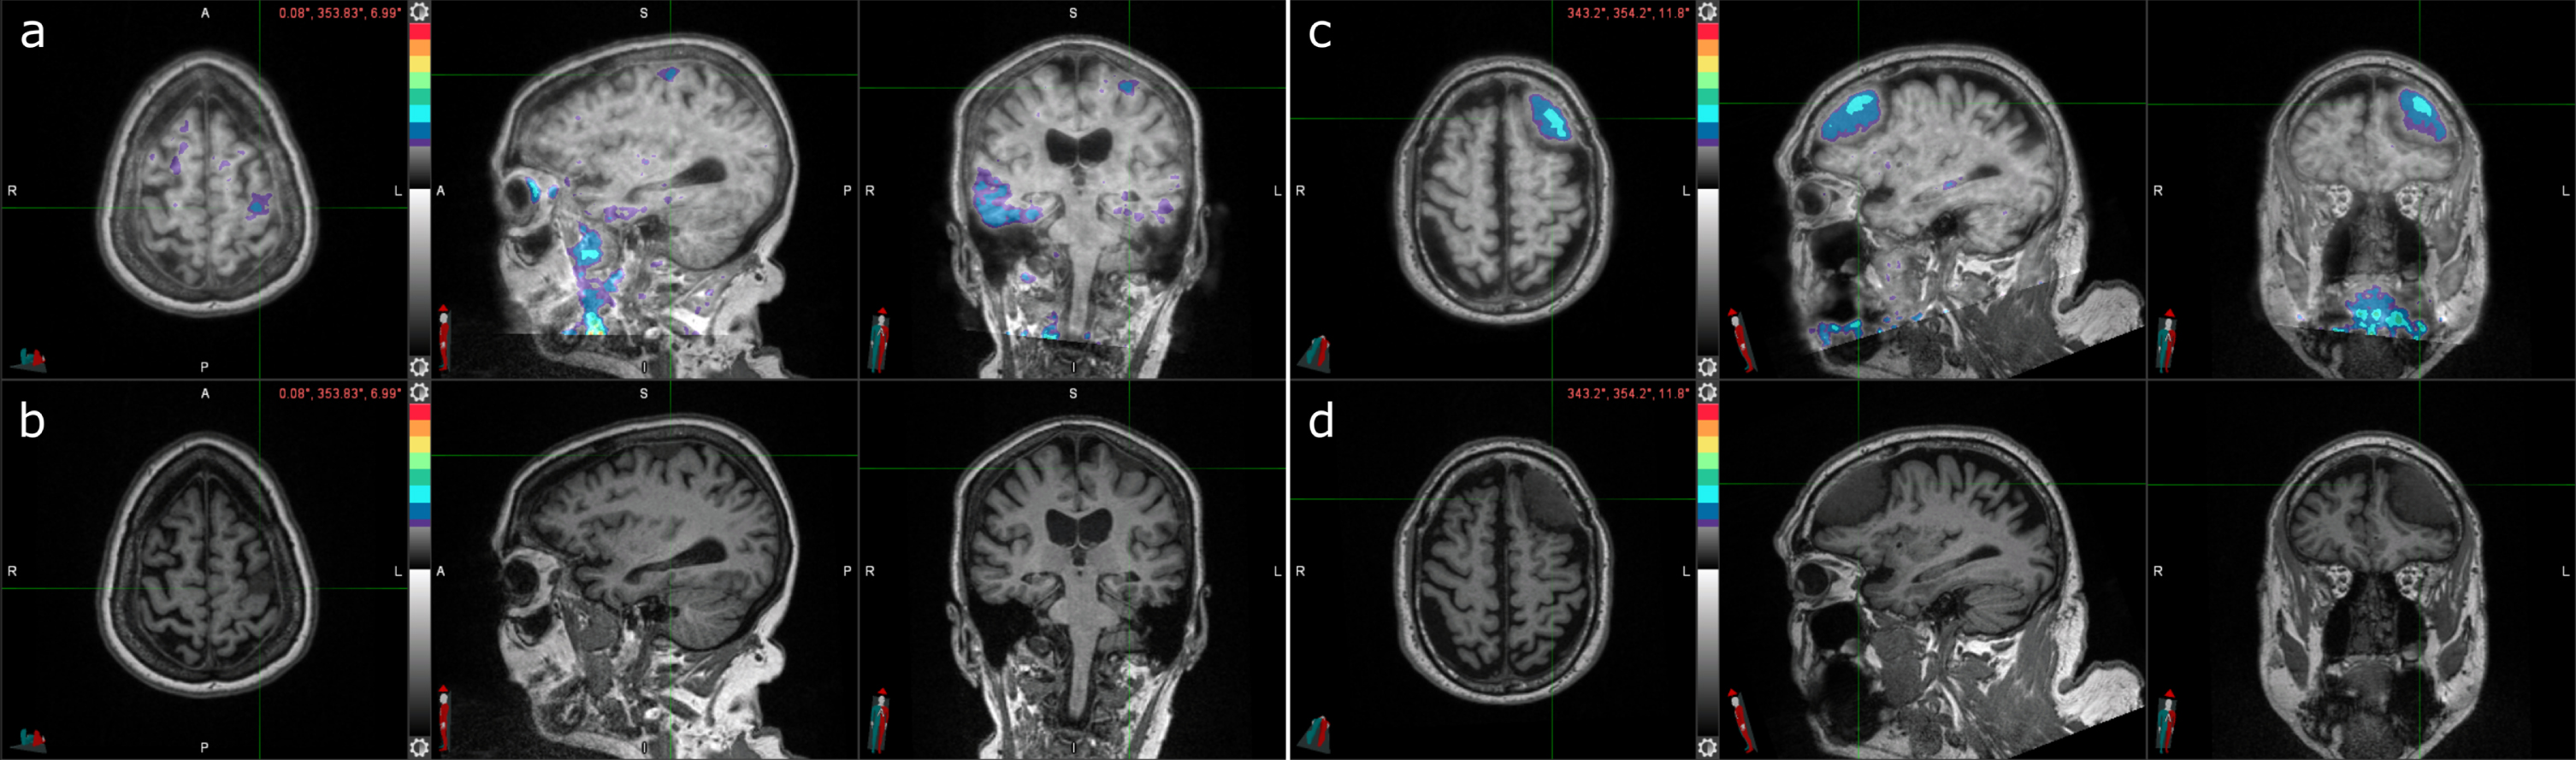 Two cases of incidental meningioma with tau PET uptake. a) Tau PET coregistered with MRI of a female participant in her 70s with a left frontal posterior meningioma (indicated by the crosshair) with tau radiotracer uptake. b) Corresponding MRI image. c) Tau PET coregistered with MRI of a male participant in his 70s with a left frontal meningioma (indicated by the crosshair) with tau radiotracer uptake. d) Corresponding MRI image.